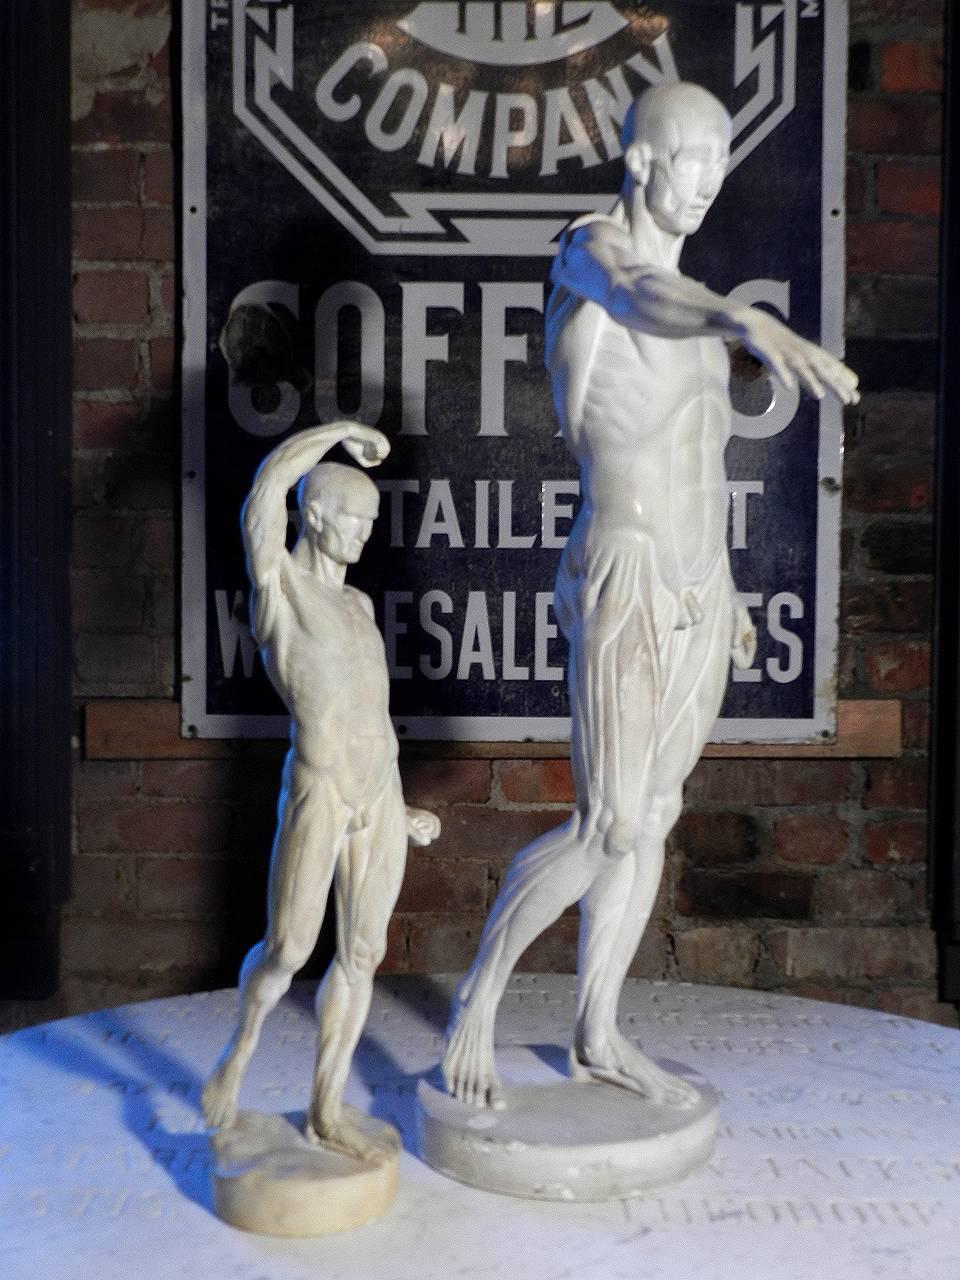 Pair of 20th century plaster anatomical models in the style of Jean Antoine Houdon and Michael Henry Sprang.

The sculpture with the arm reaching is a 